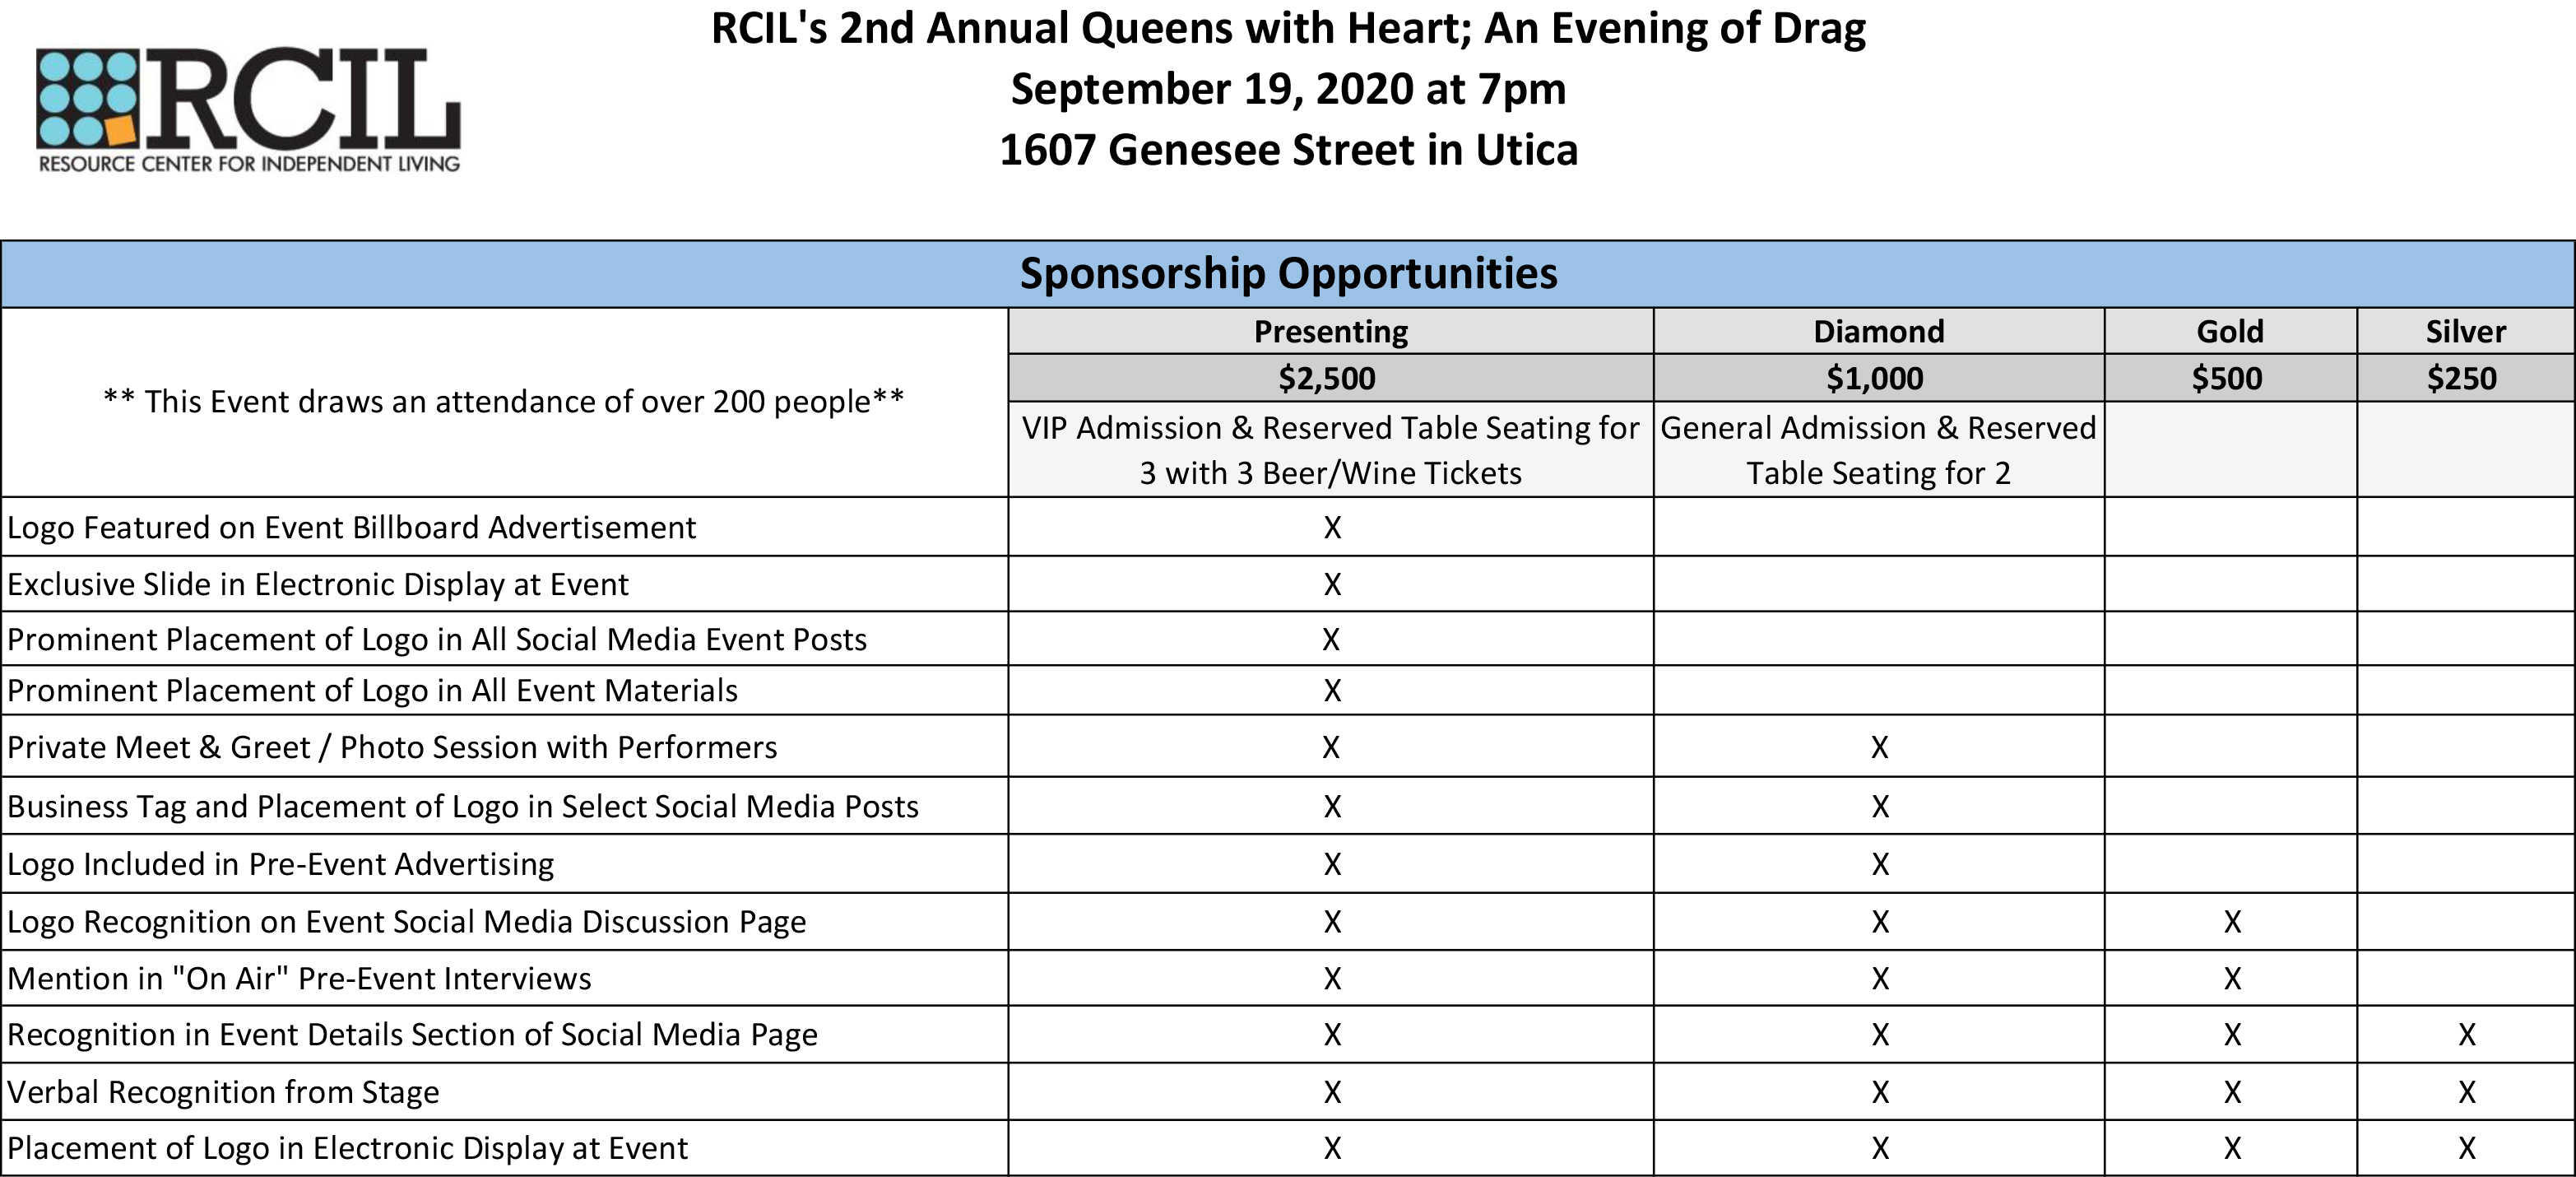 Table displaying 2020 Queens with Heart Drag Show Sponsorship Opportunitiies